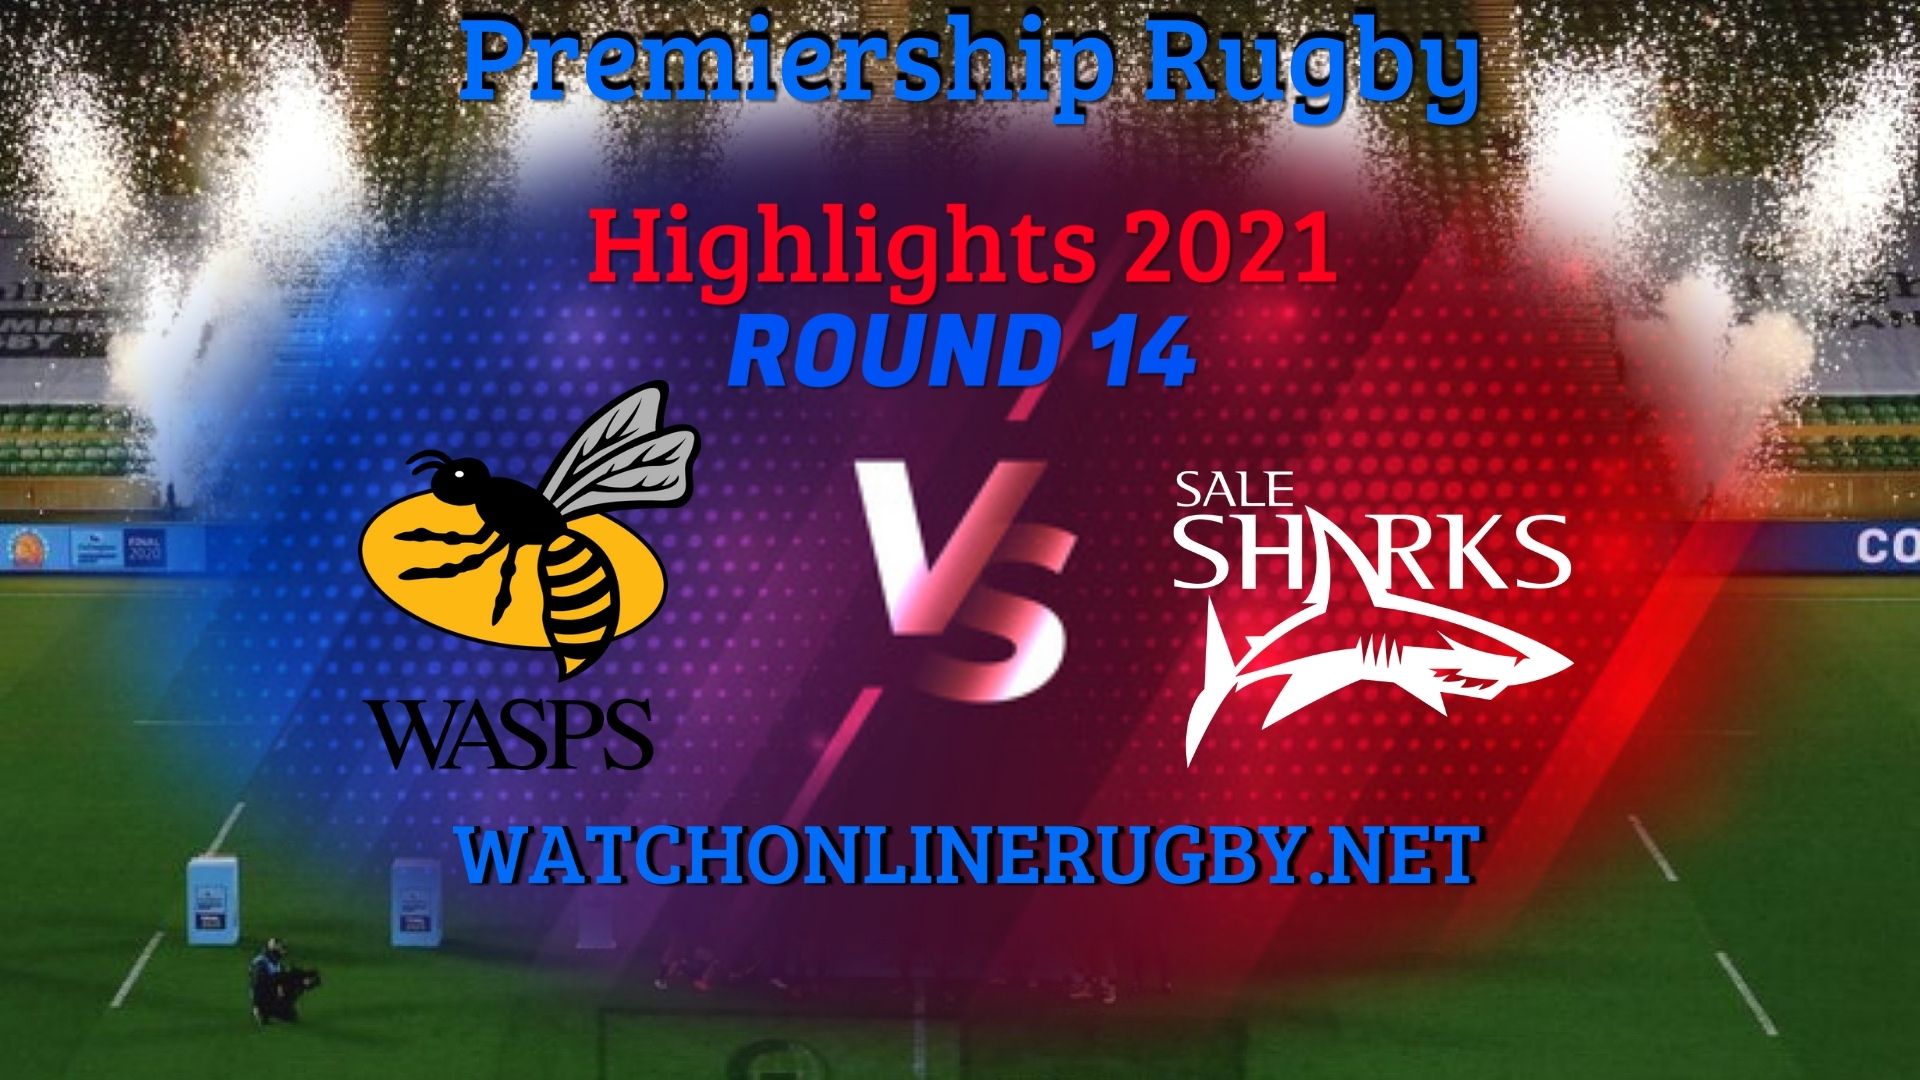 Wasps Vs Sale Sharks Premiership Rugby 2021 RD 15